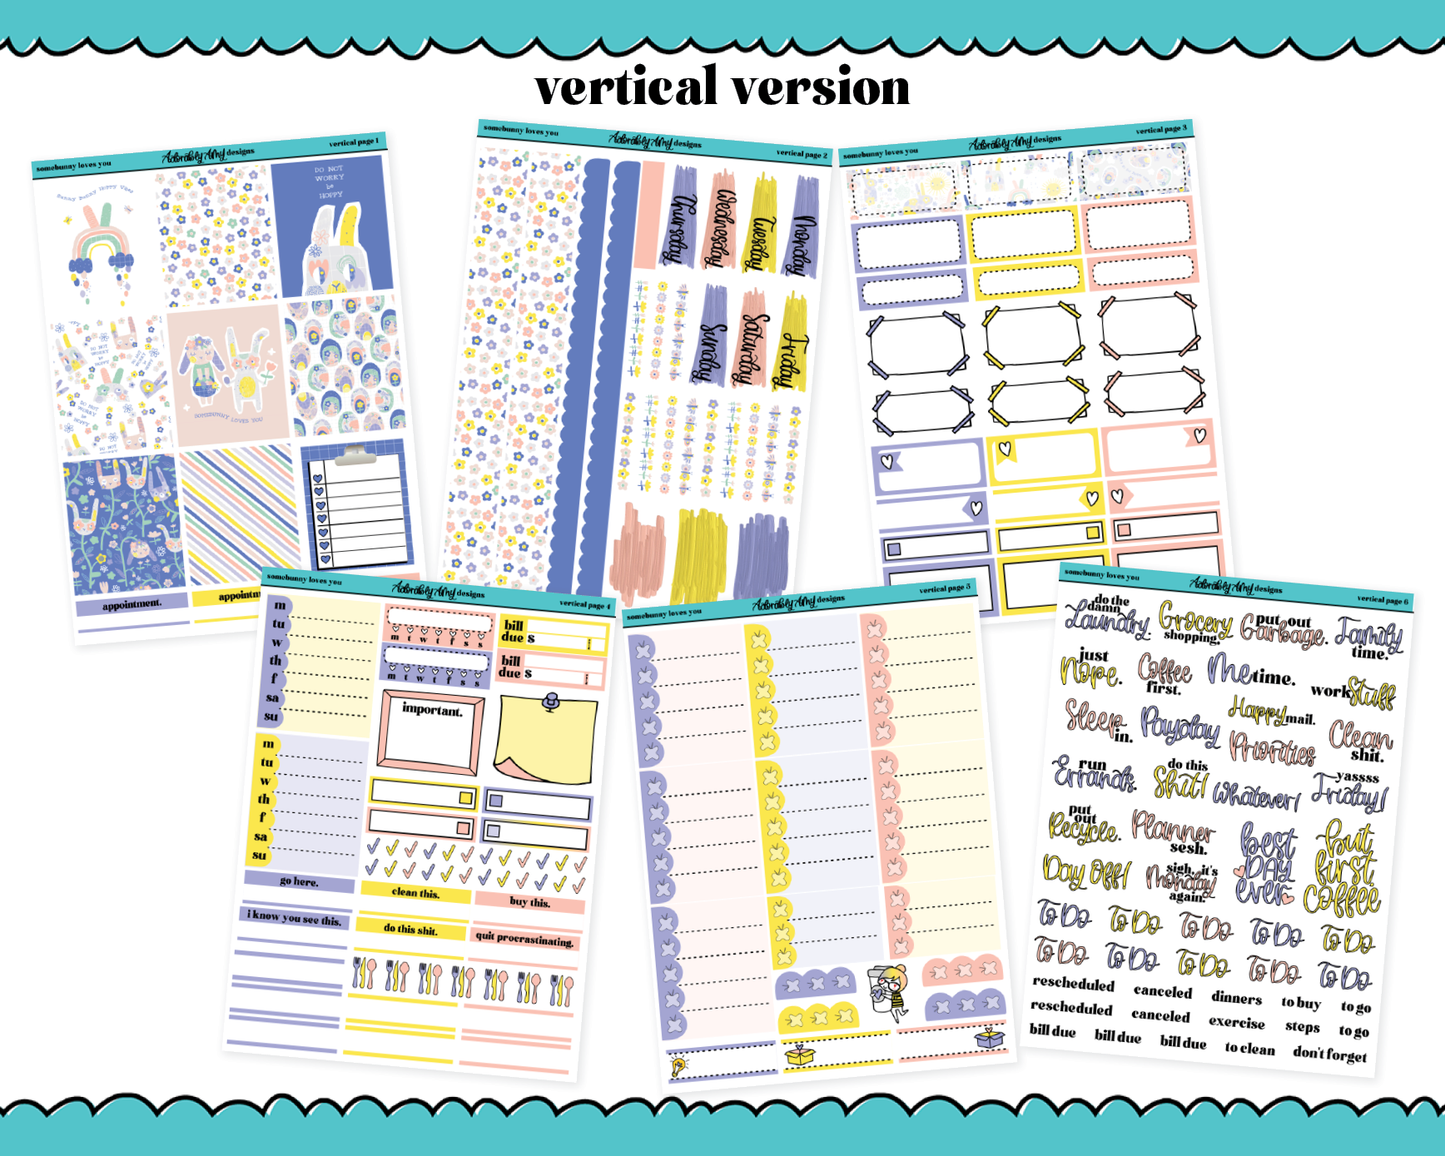 Vertical Somebunny Loves You Planner Sticker Kit for Vertical Standard Size Planners or Inserts